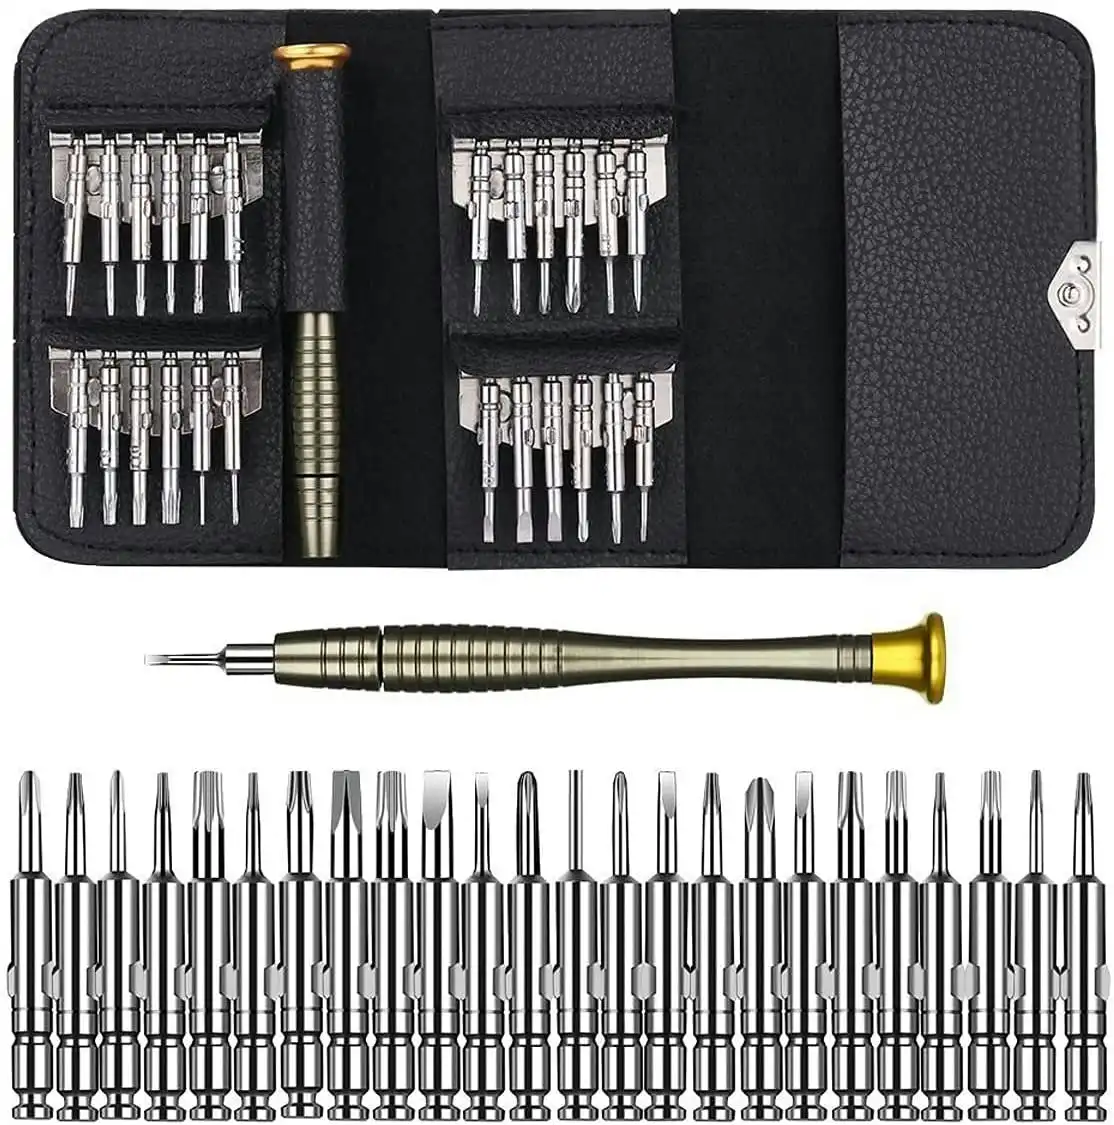 25in1 PRO Repair Tools Screwdrivers Kit for iPhone iPad Samsung Tablet PC